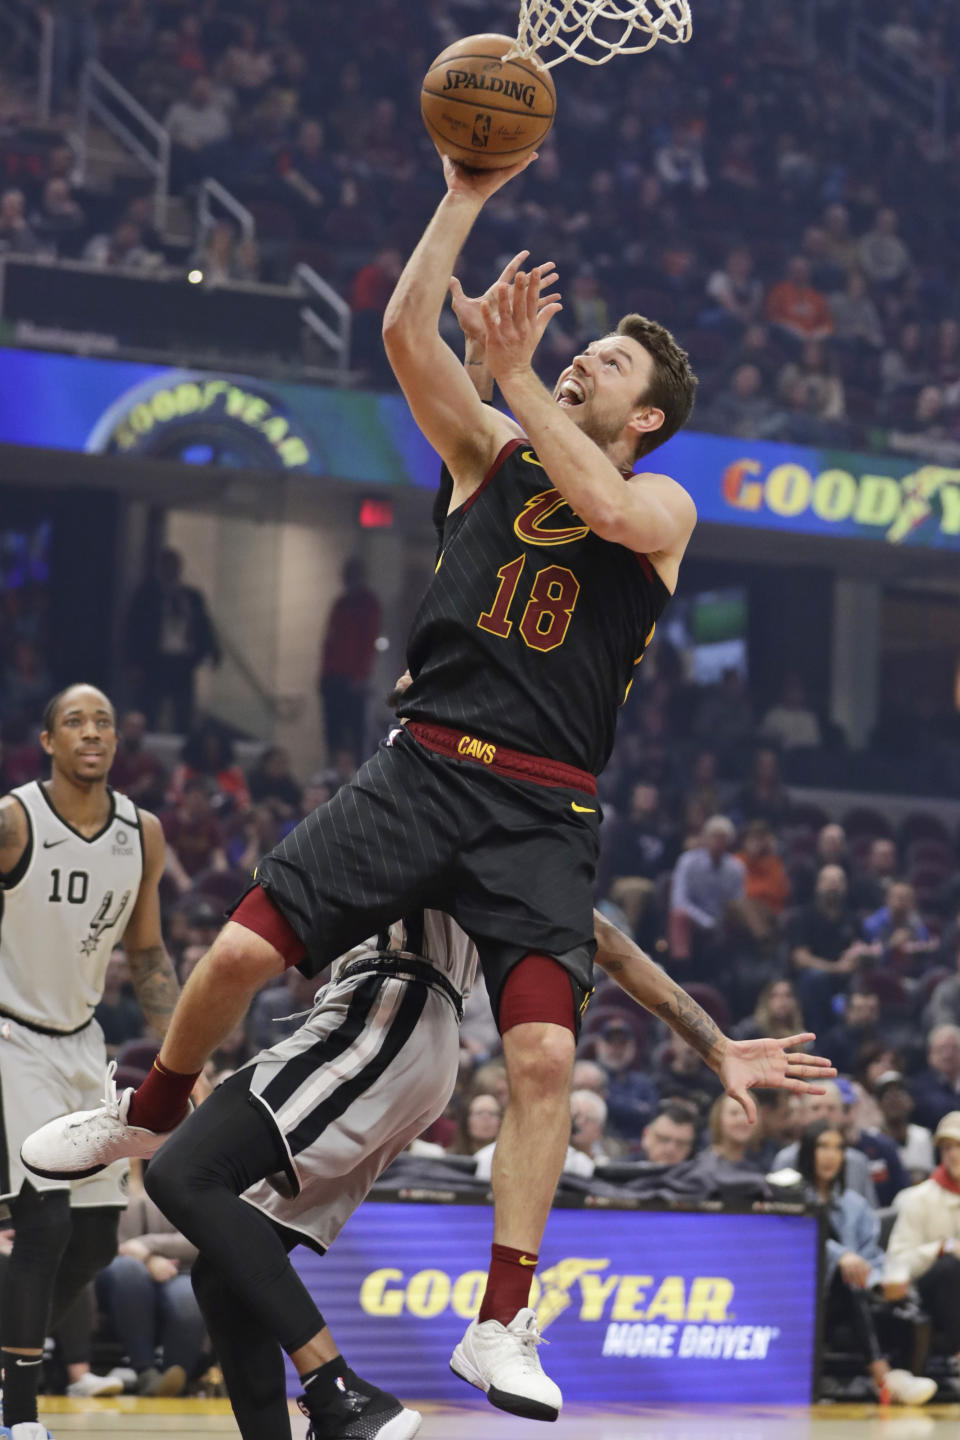 Cleveland Cavaliers' Matthew Dellavedova (18) drives to the basket against the San Antonio Spurs in the first half of an NBA basketball game, Sunday, March 8, 2020, in Cleveland. (AP Photo/Tony Dejak)